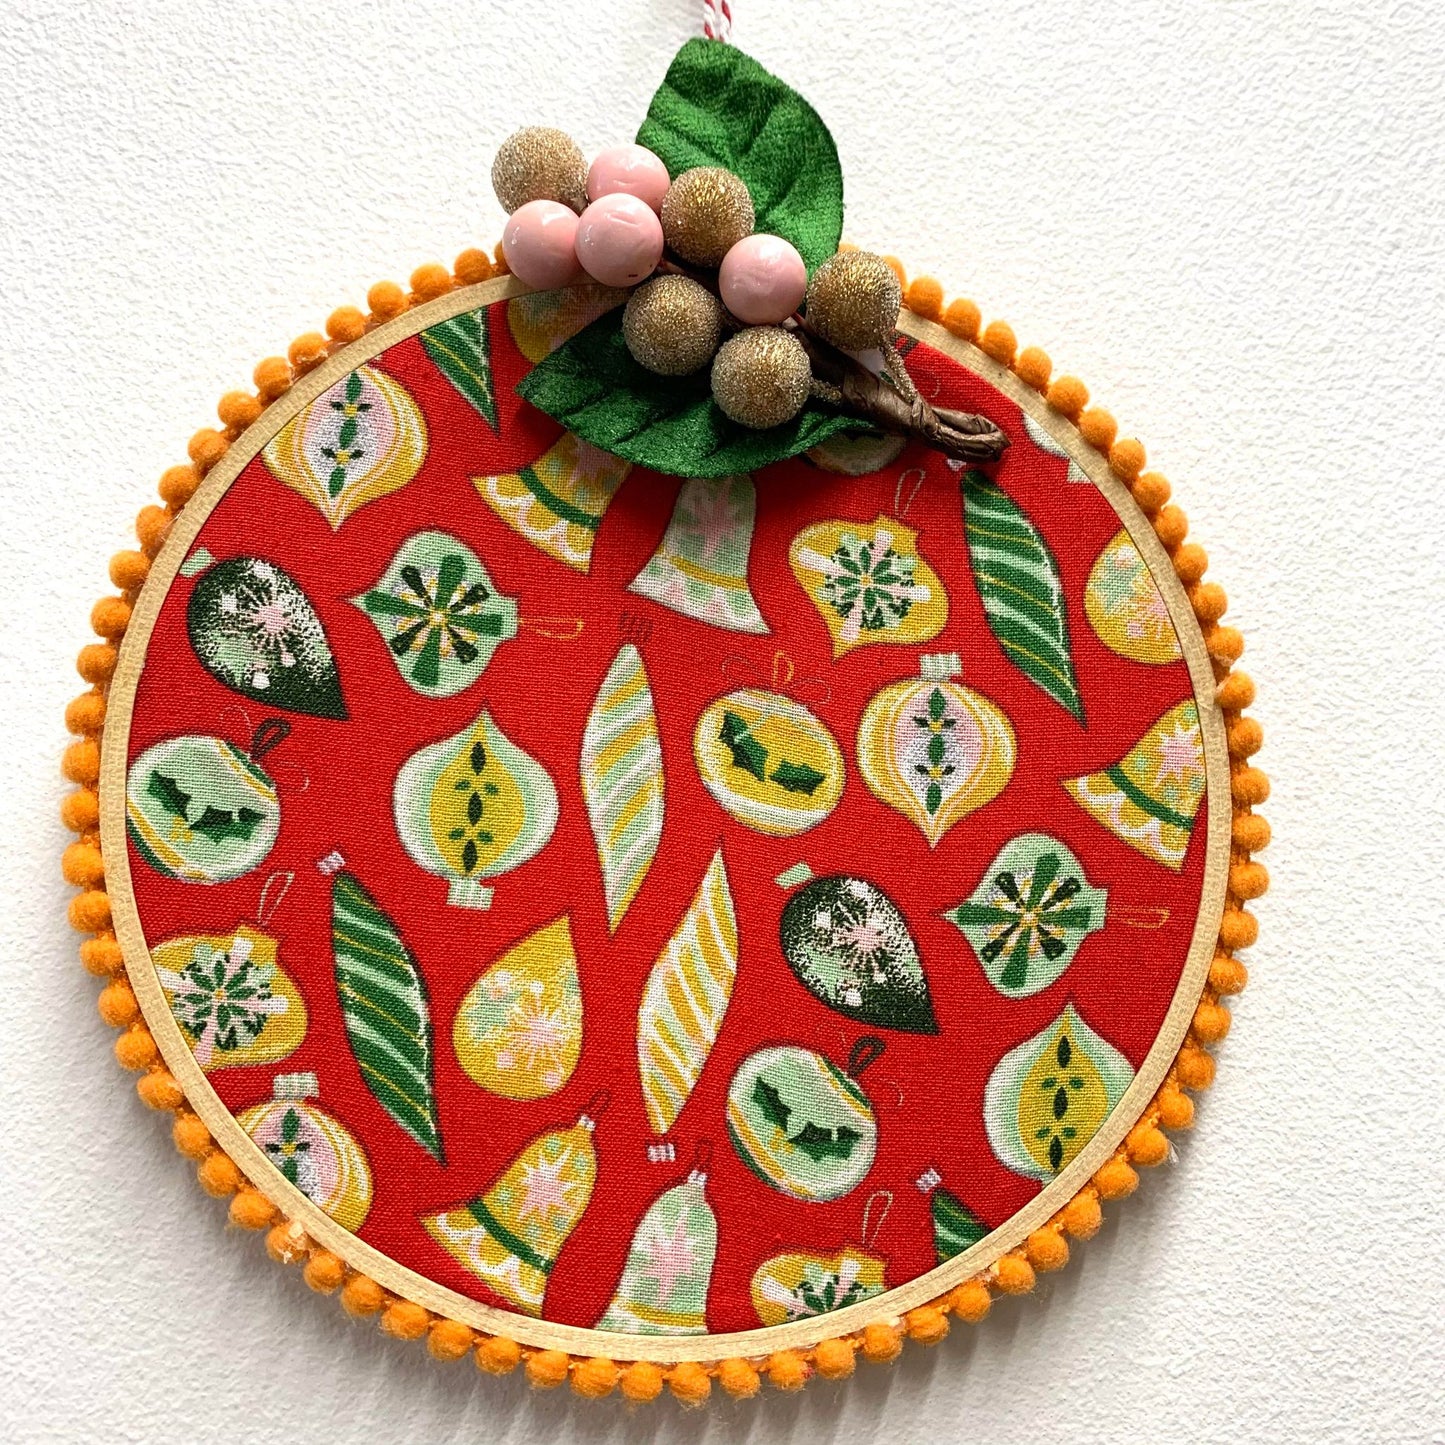 THIS BIRD HAS FLOWN- "Vintage Baubles" Large Embroidery Hoop Christmas Decoration